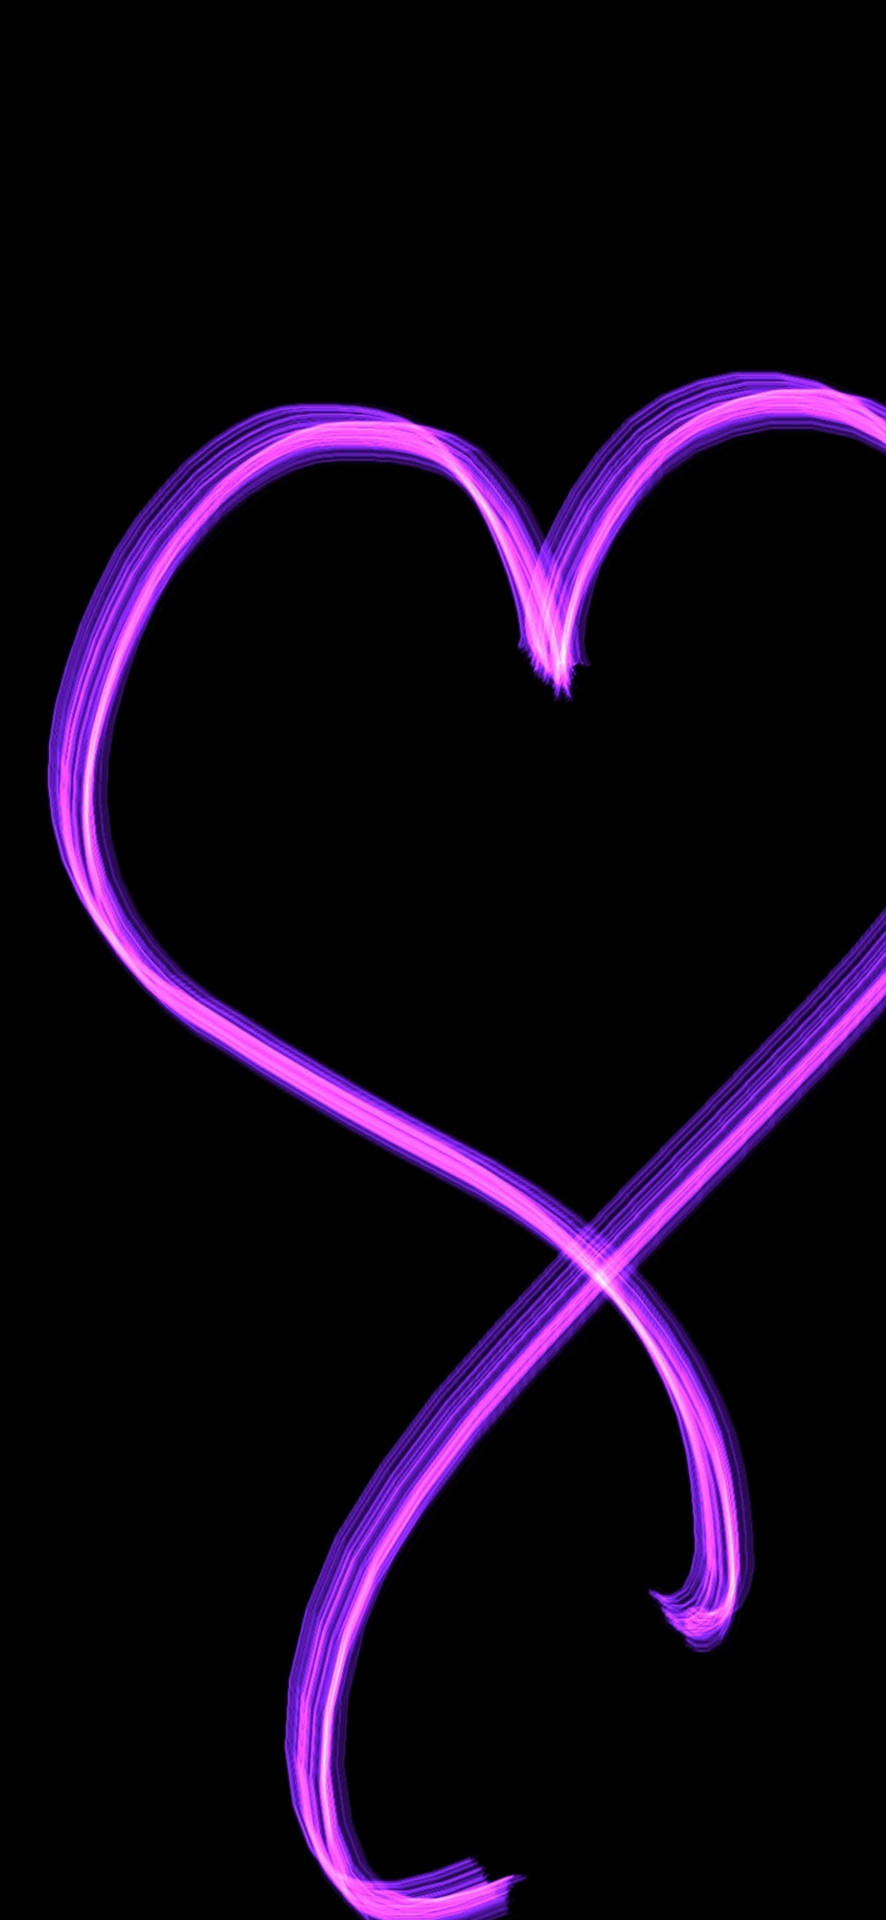 Black And Purple Aesthetic Heart Drawing Wallpaper